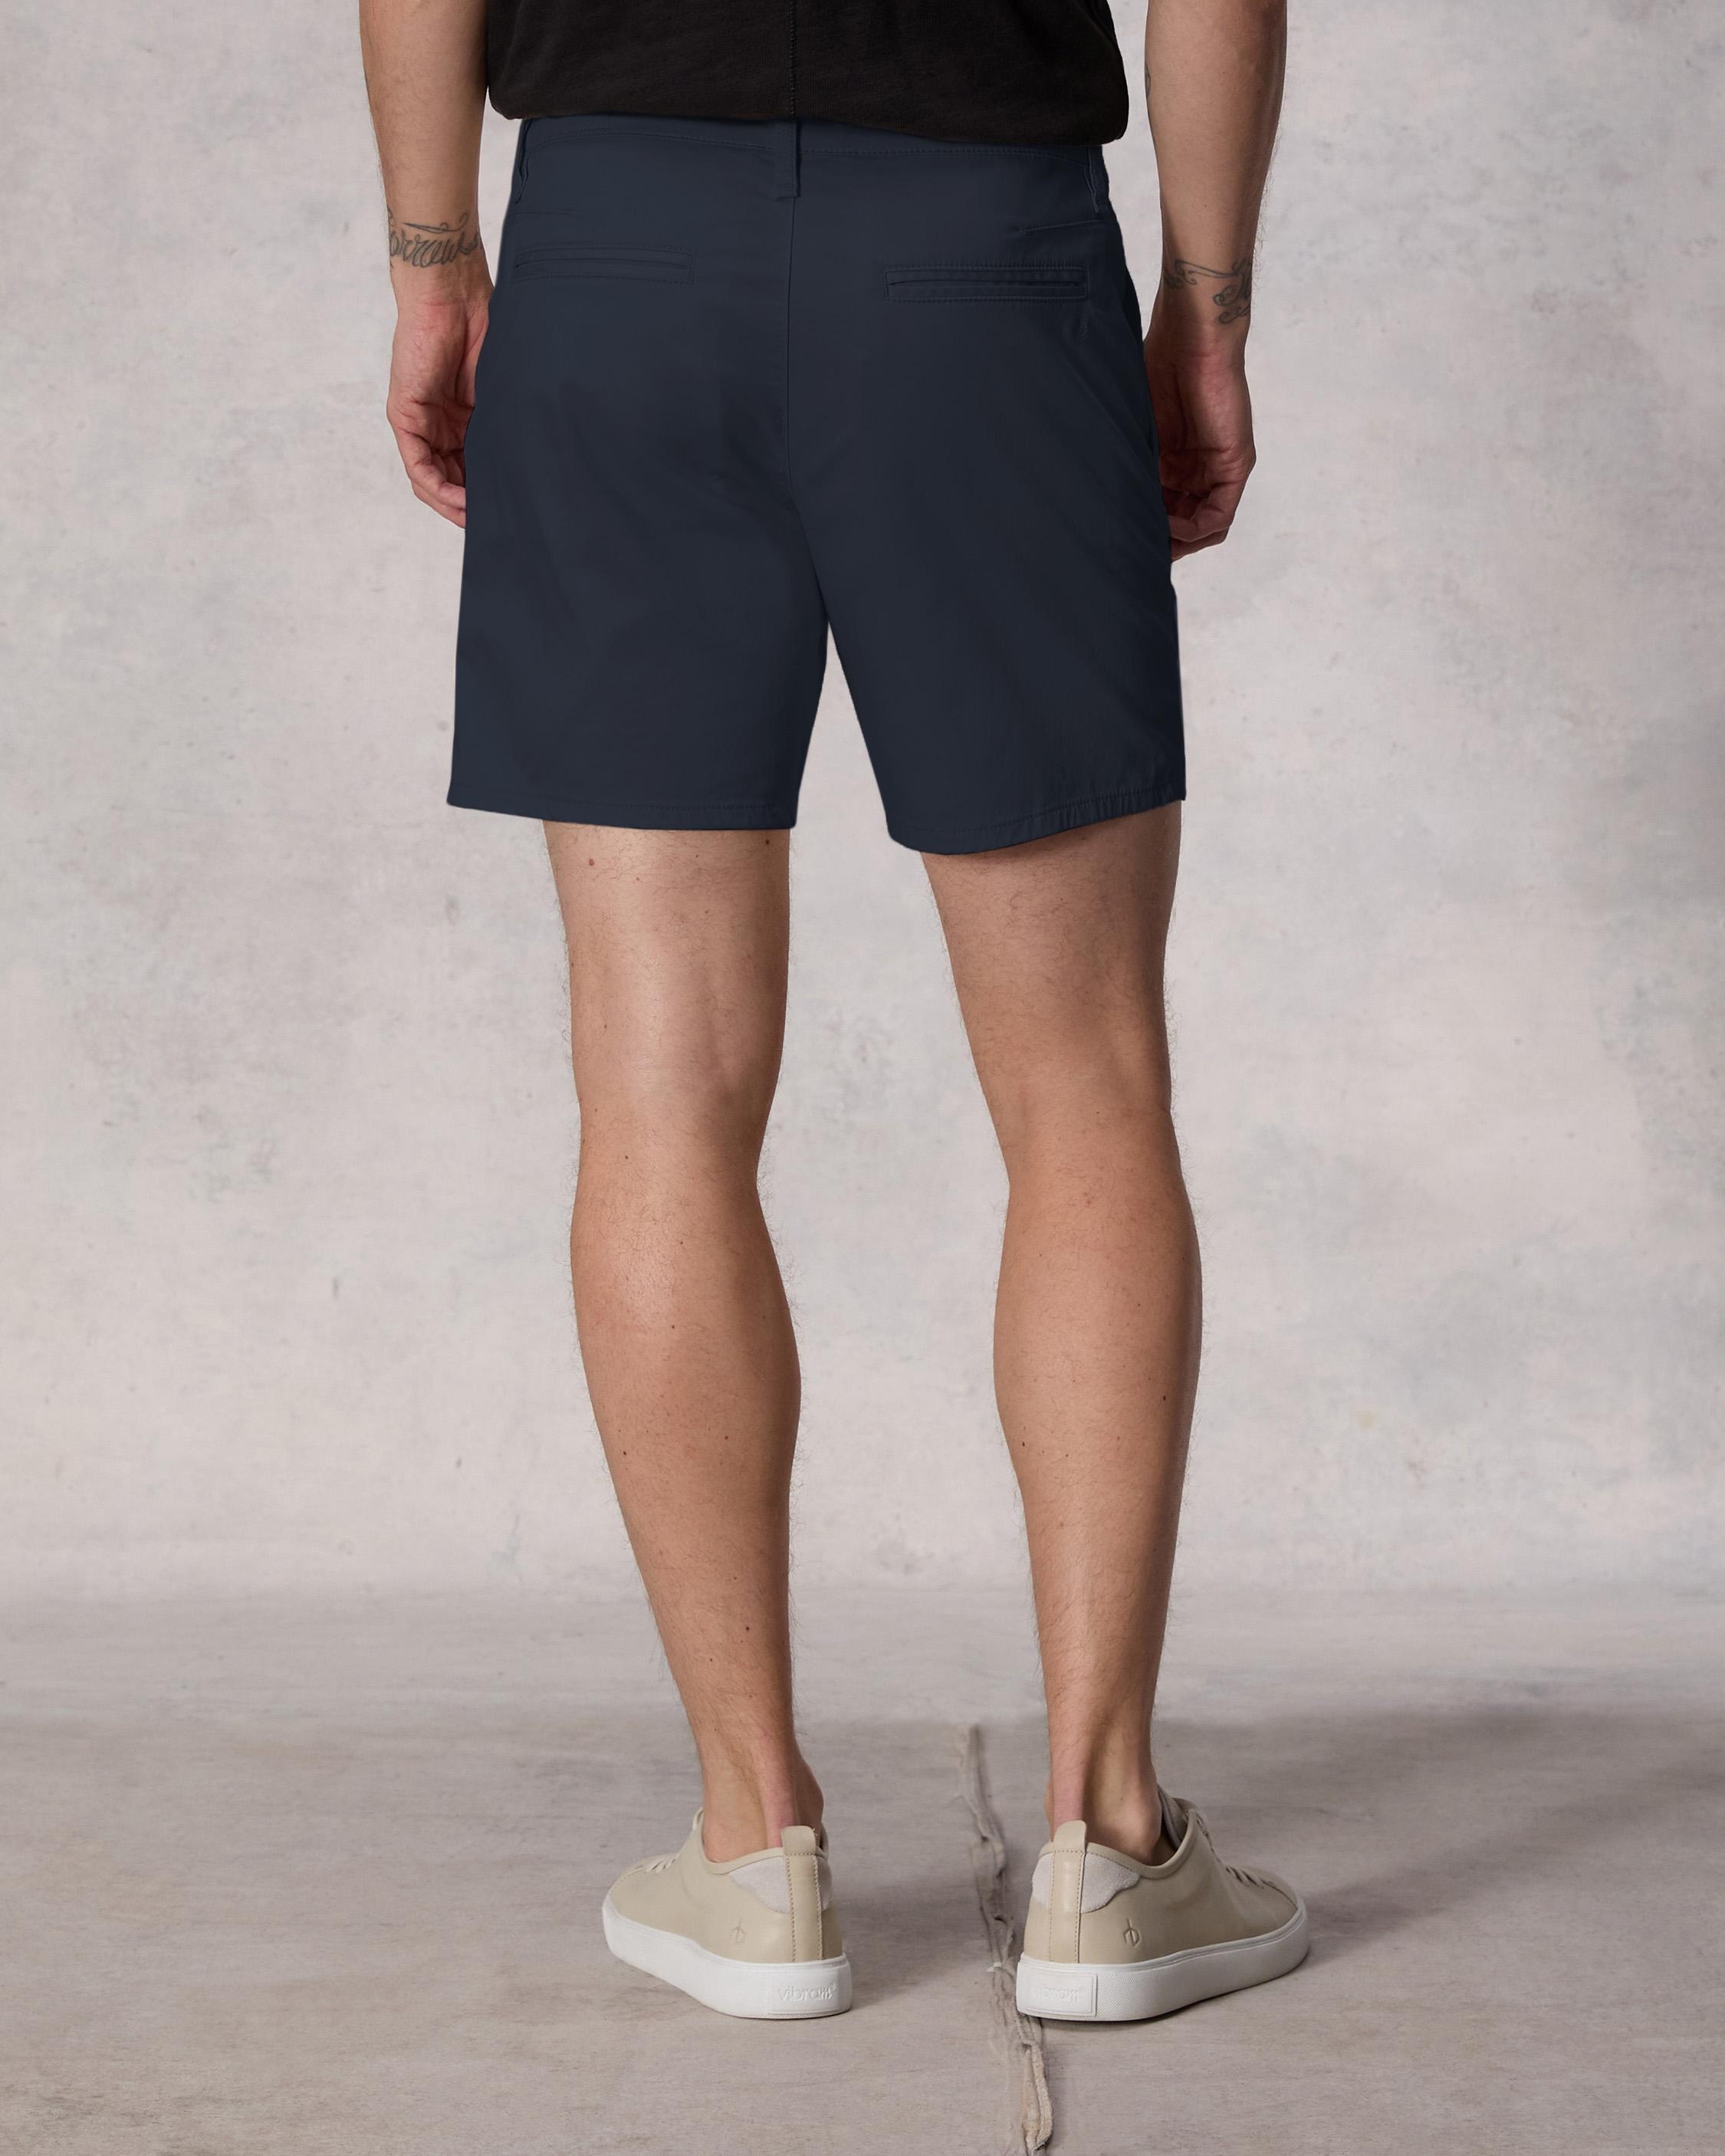 Standard Cotton Chino Short
Classic Fit - 4